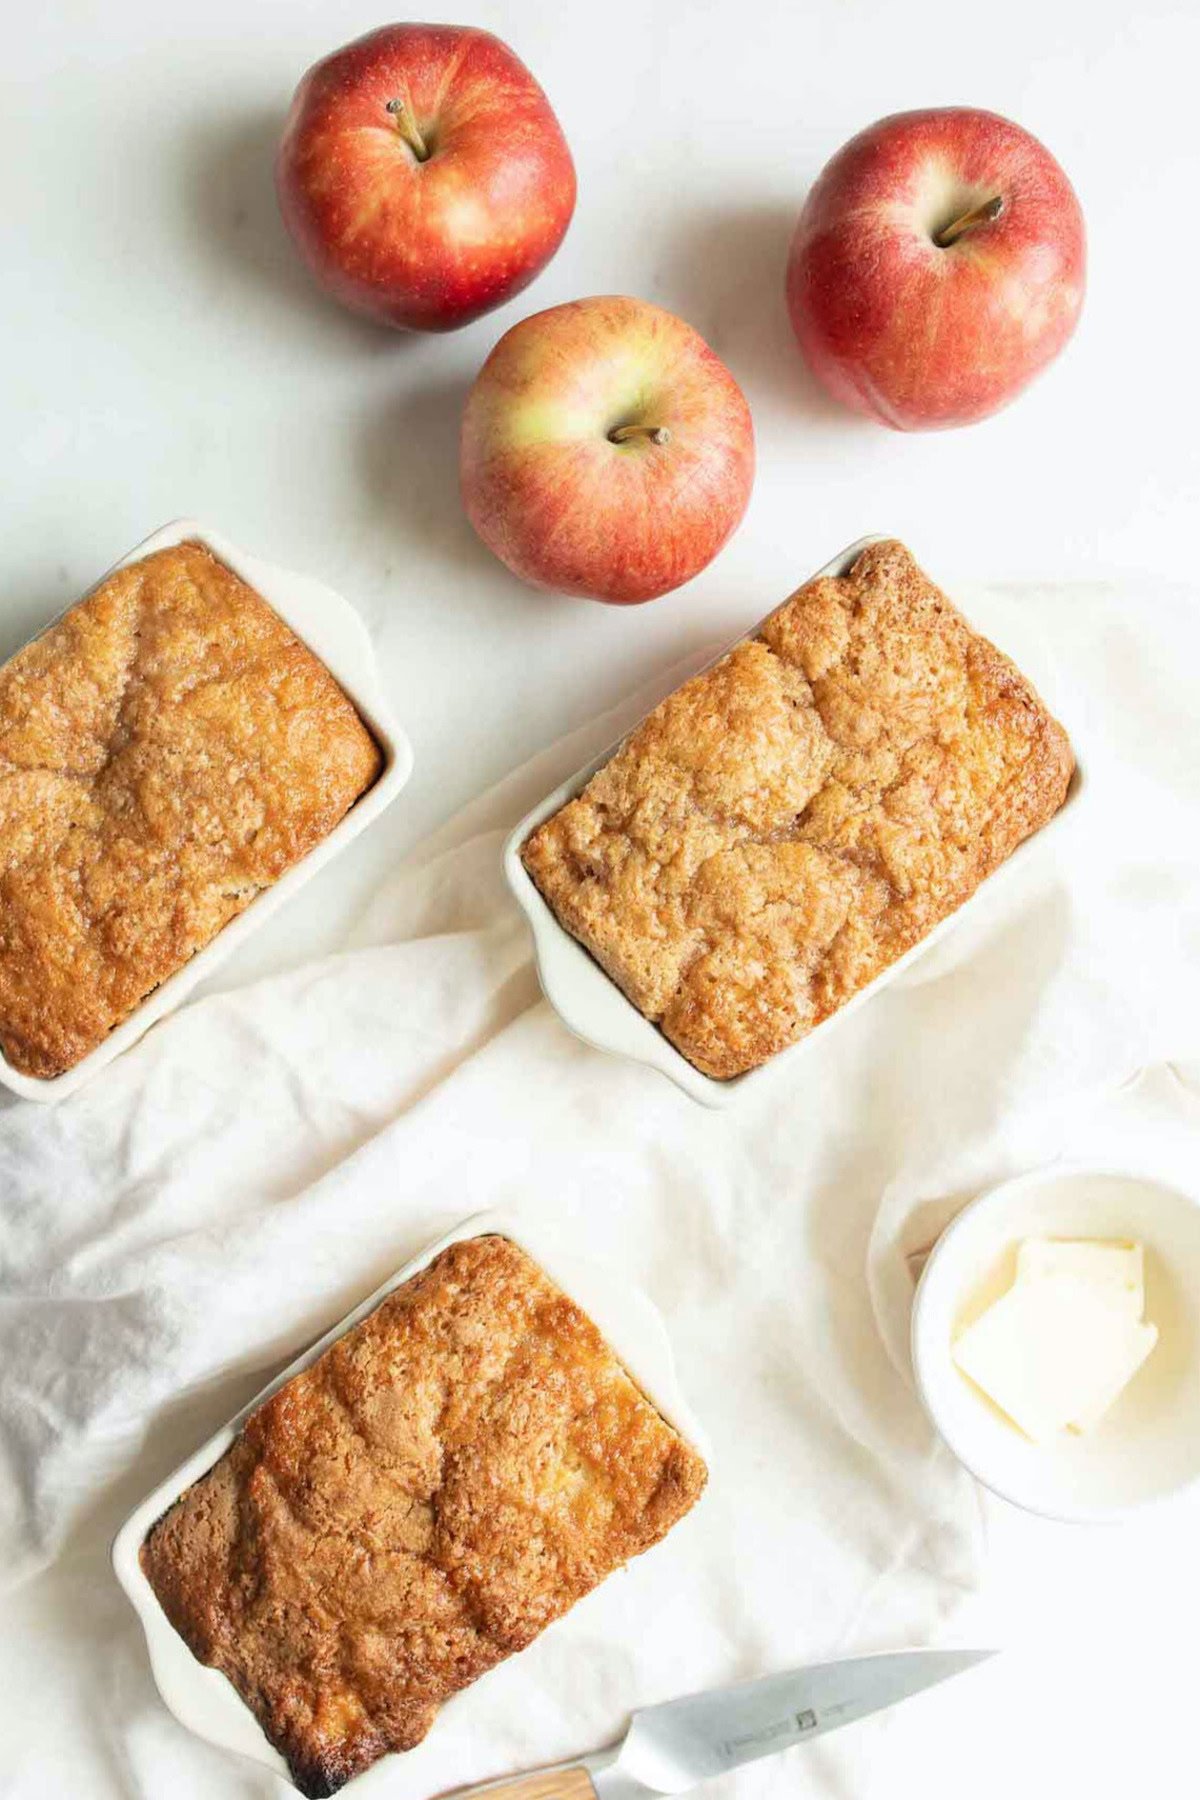 Three baked apple bread loaves in white dishes rest on a white cloth, accompanied by three red apples and a butter dish. A knife with a wooden handle peeks into the frame at the lower right corner, showcasing the perfect scene for an apple bread recipe.